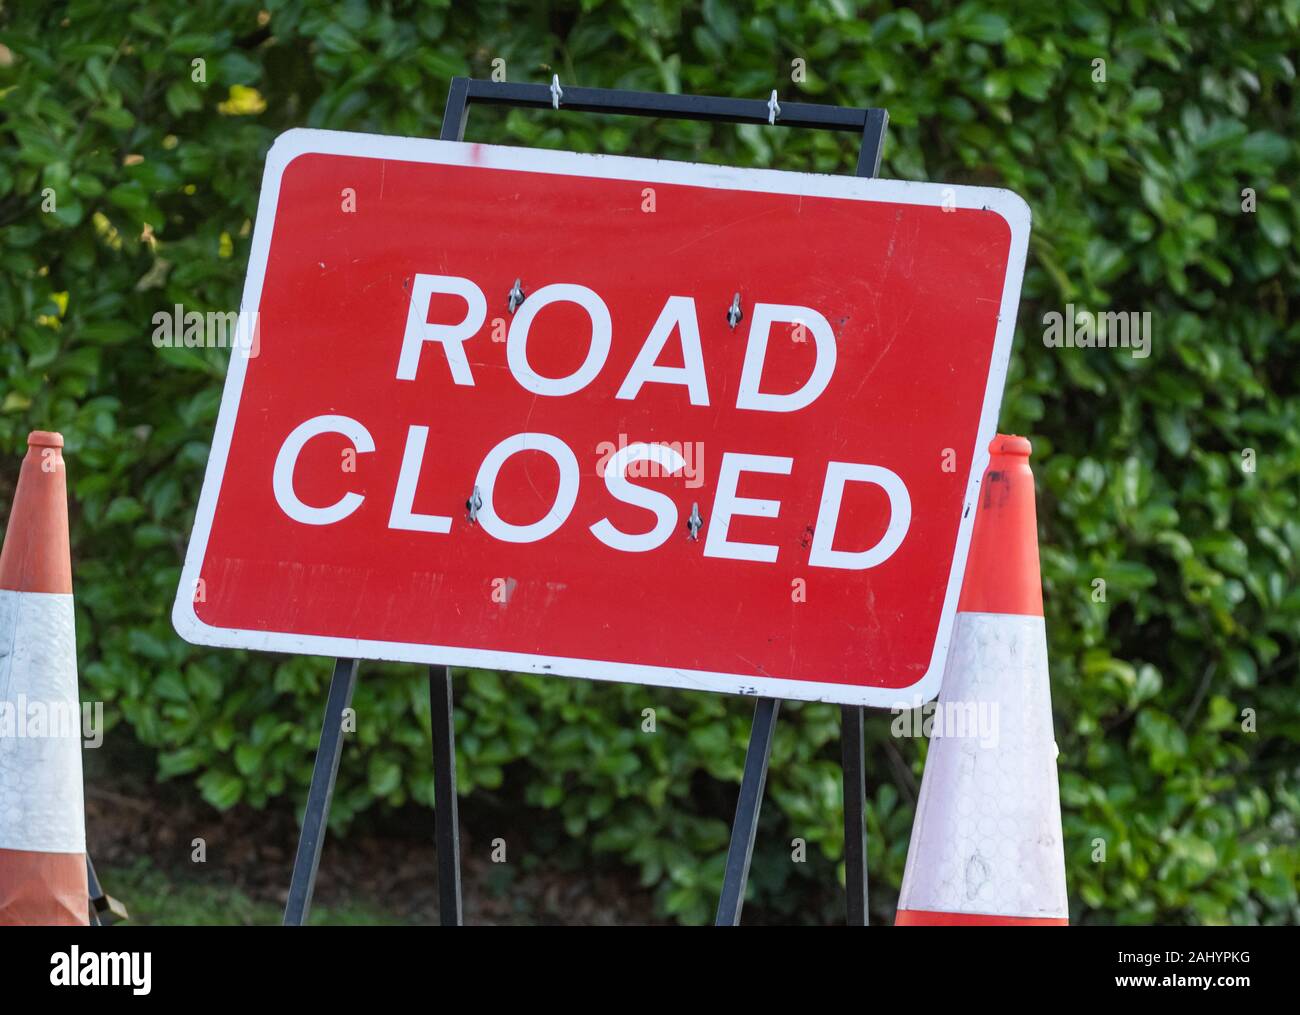 A red road closure sign (UK) in the middle of red and white traffic cones. Stock Photo